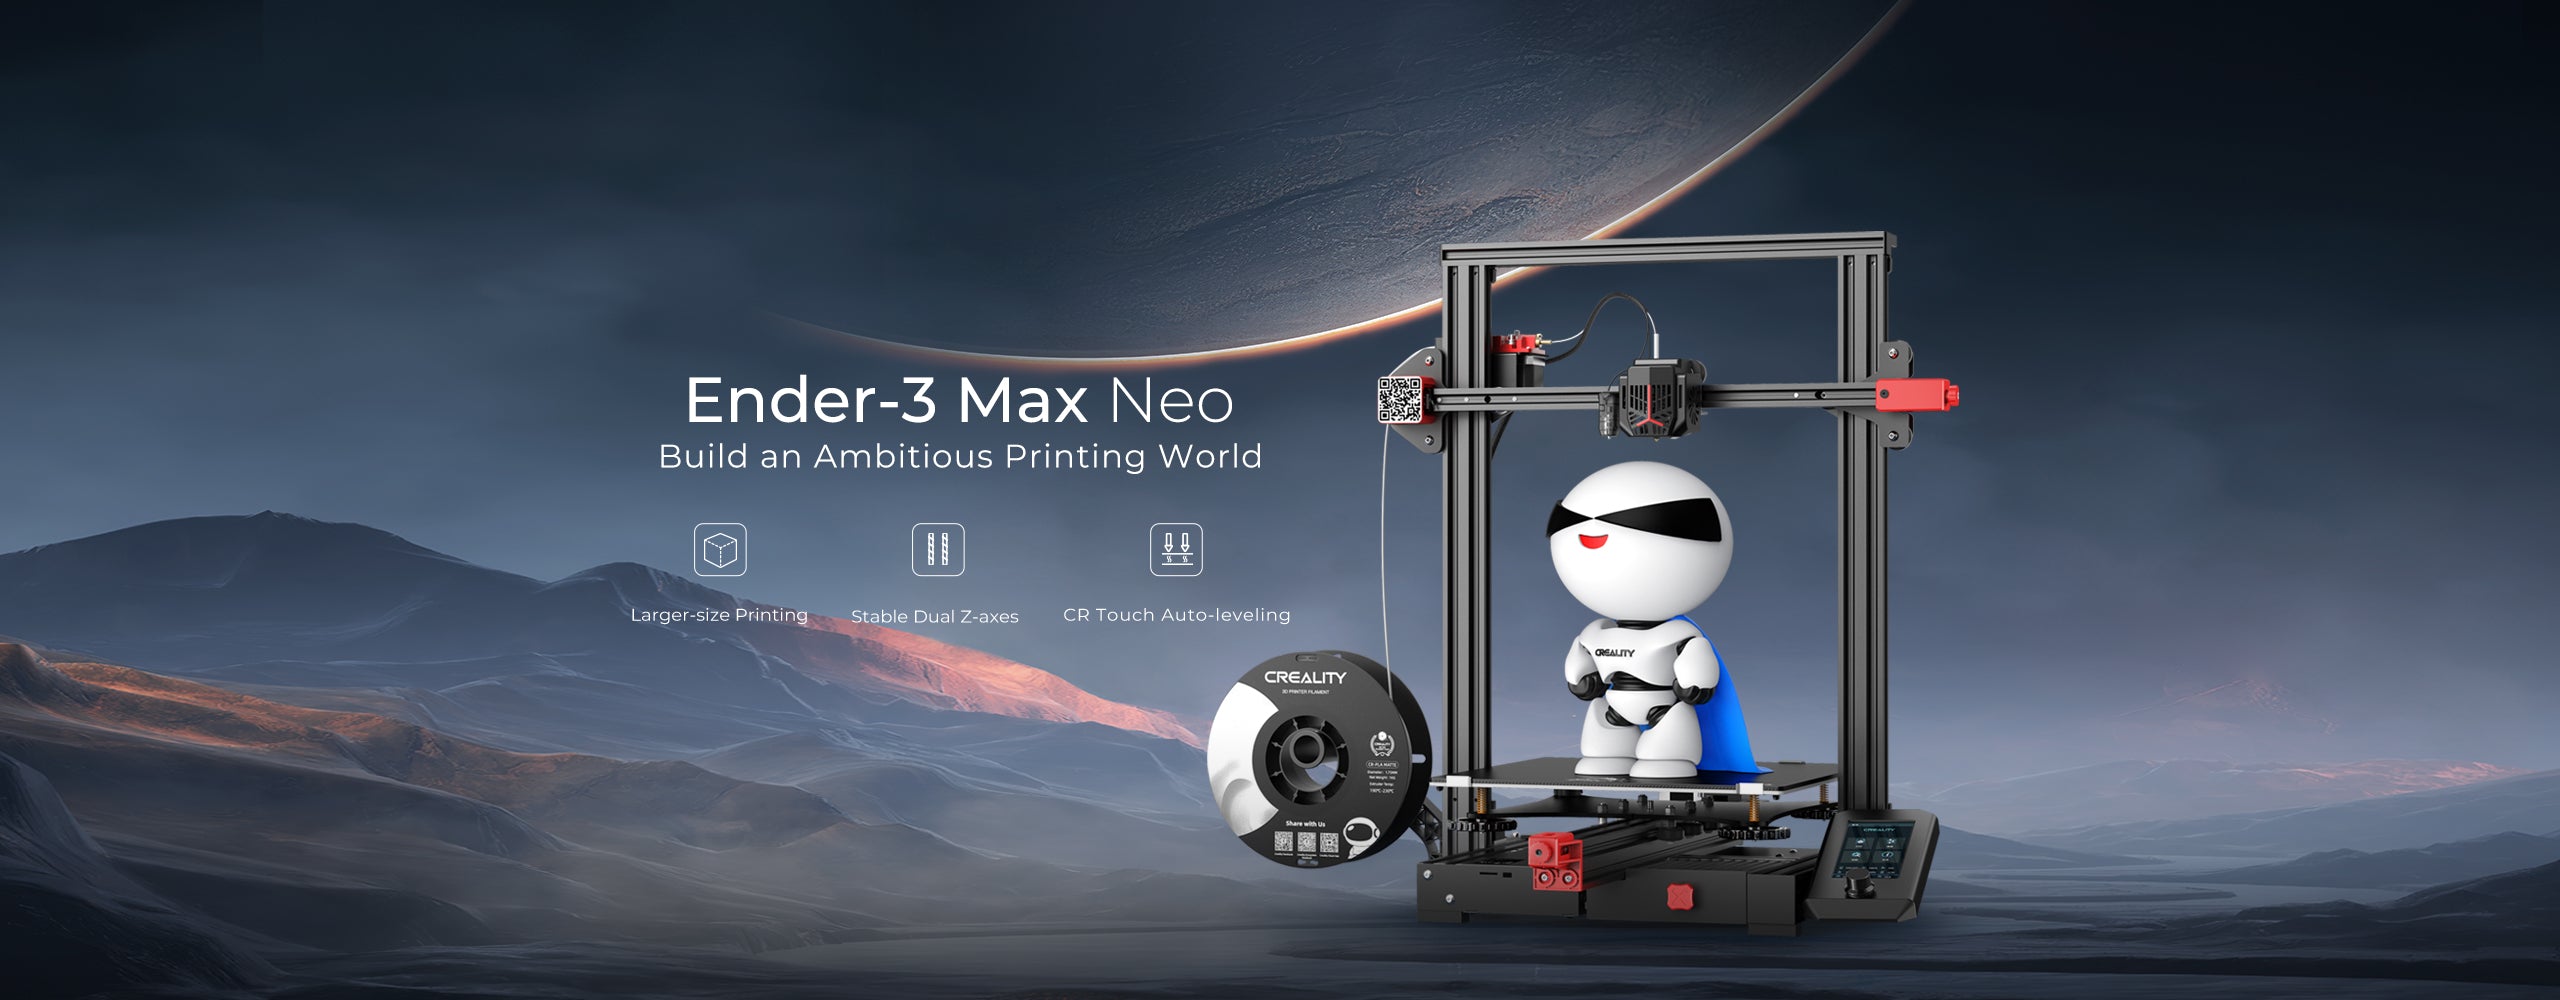 Creality K1 Max FDM 3D Printer; 4.3 Color LCD Screen; Automatic Leveling;  Flexible Build Plate Bed; 300 x 300 x 300mm Print - Micro Center